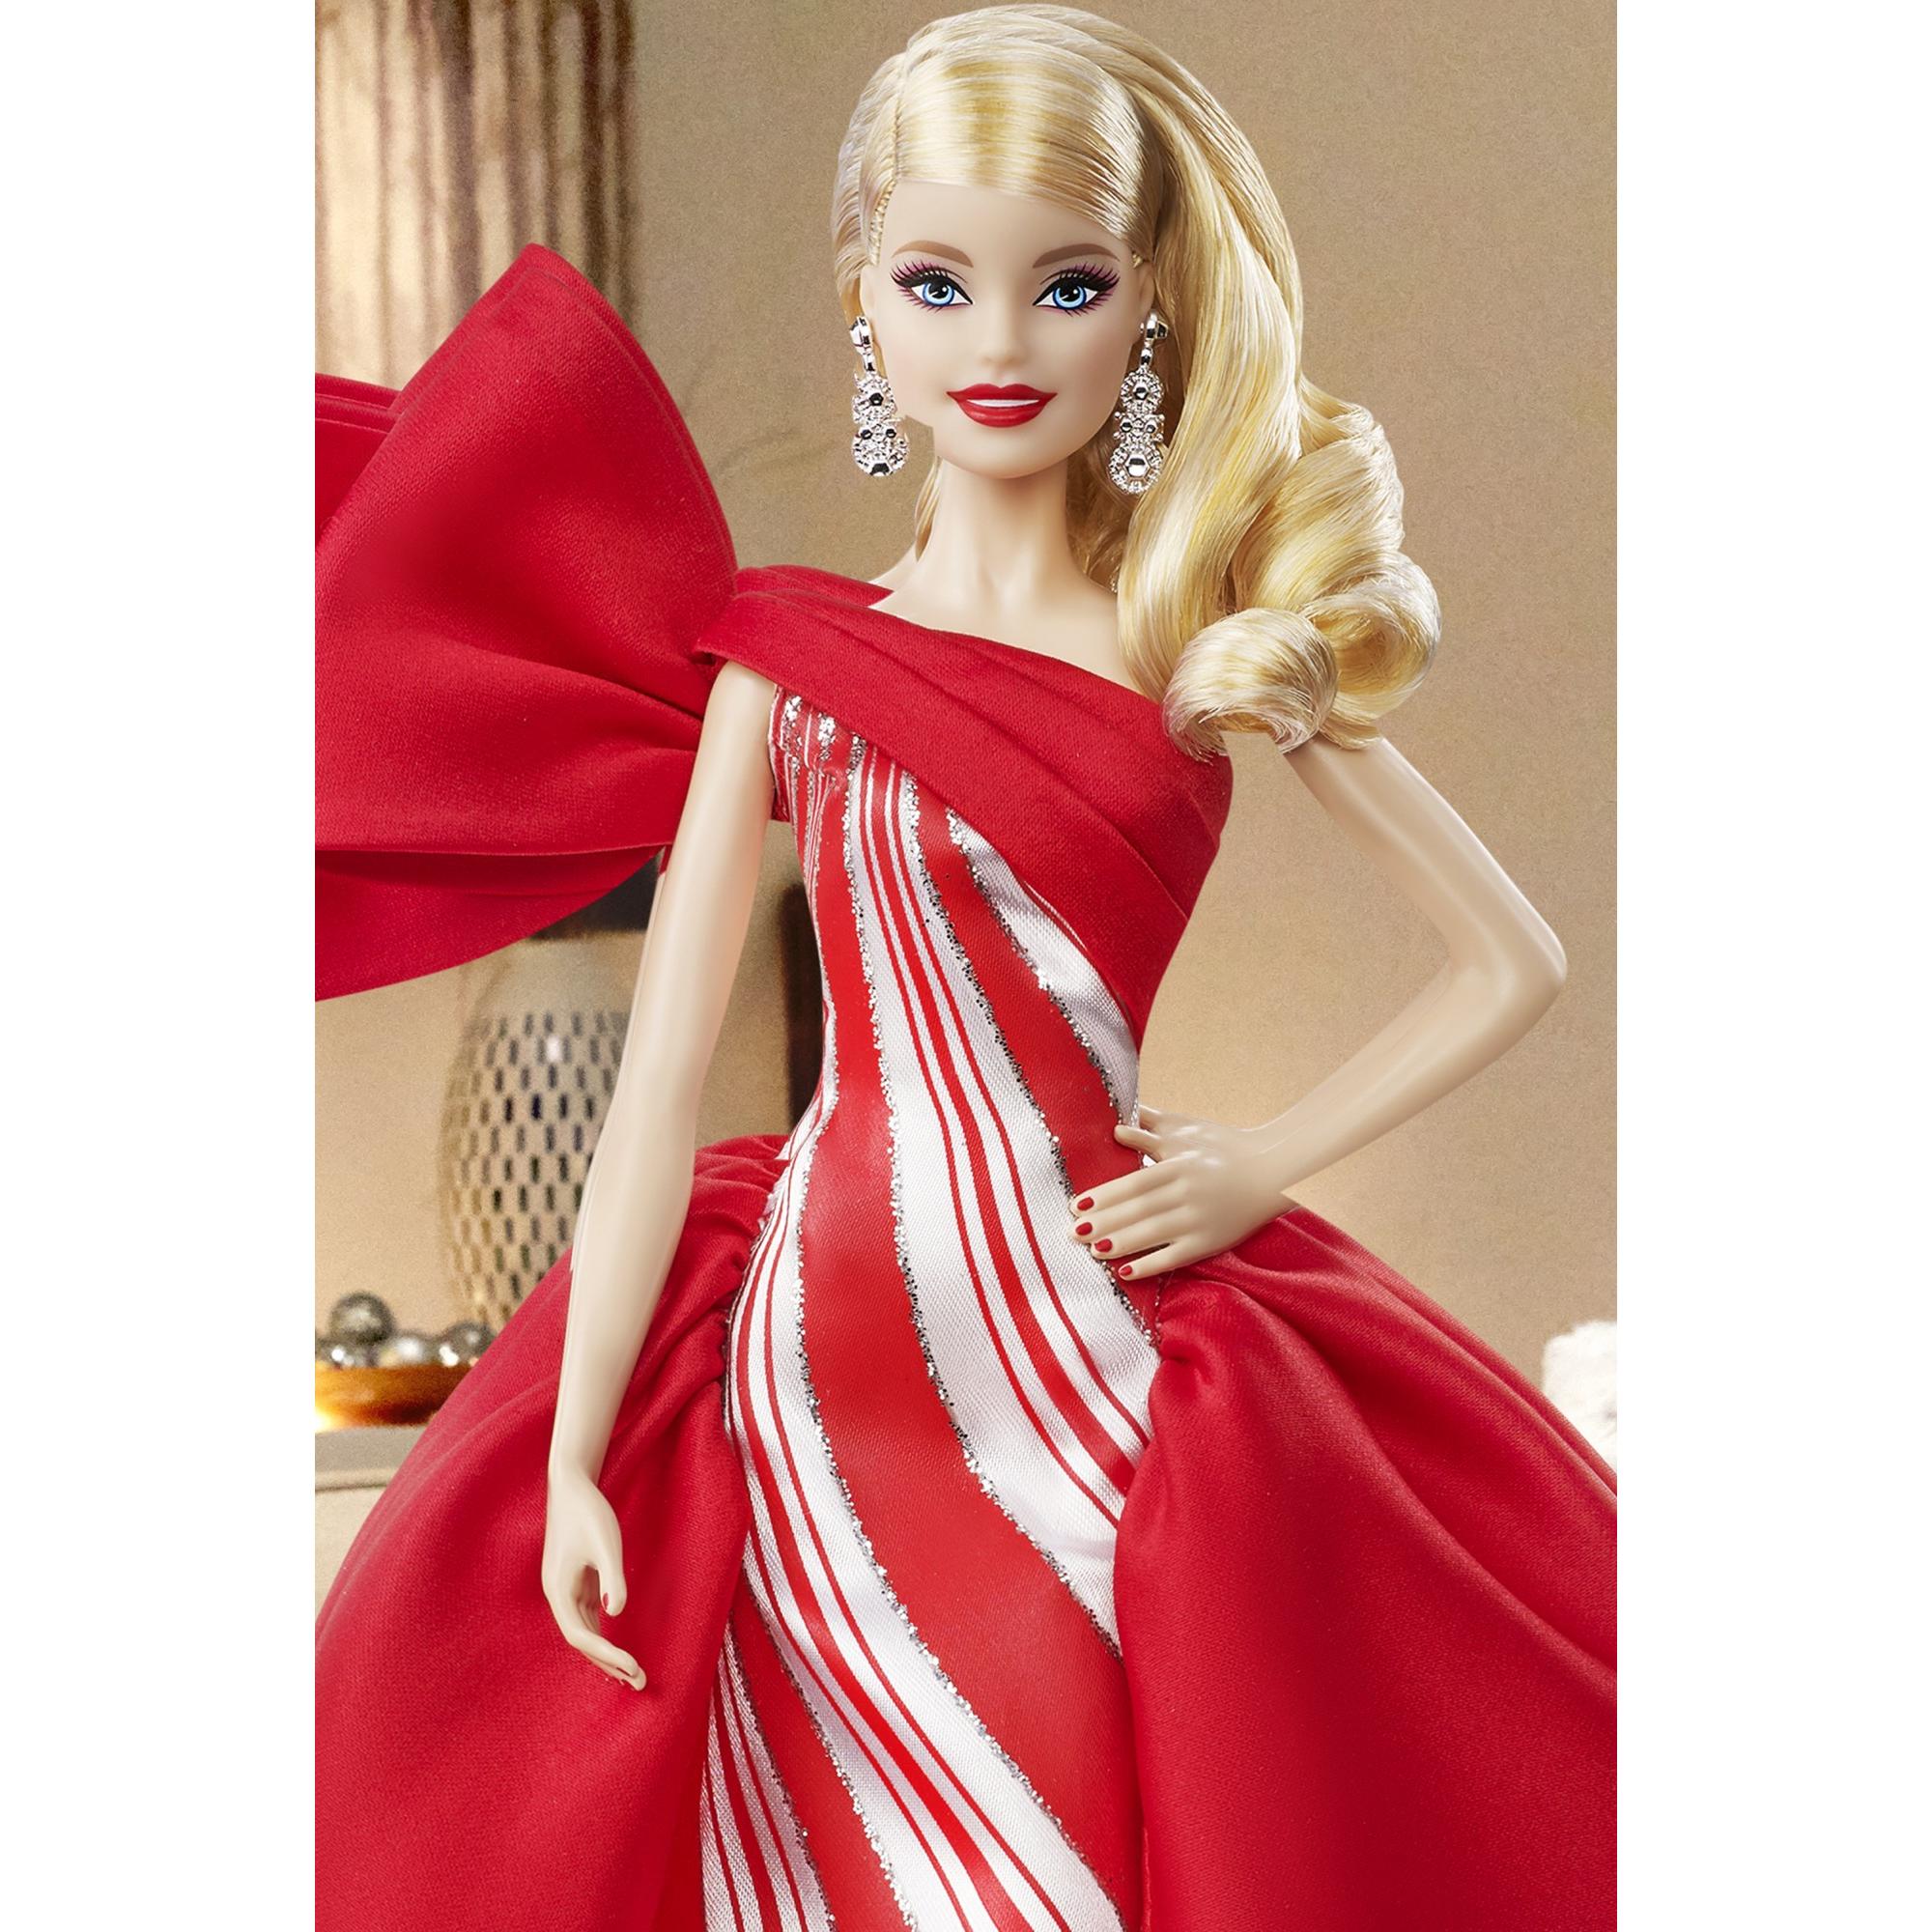 Barbie 2019 Holiday Doll, Blonde Curls with Red & White Gown - image 9 of 10